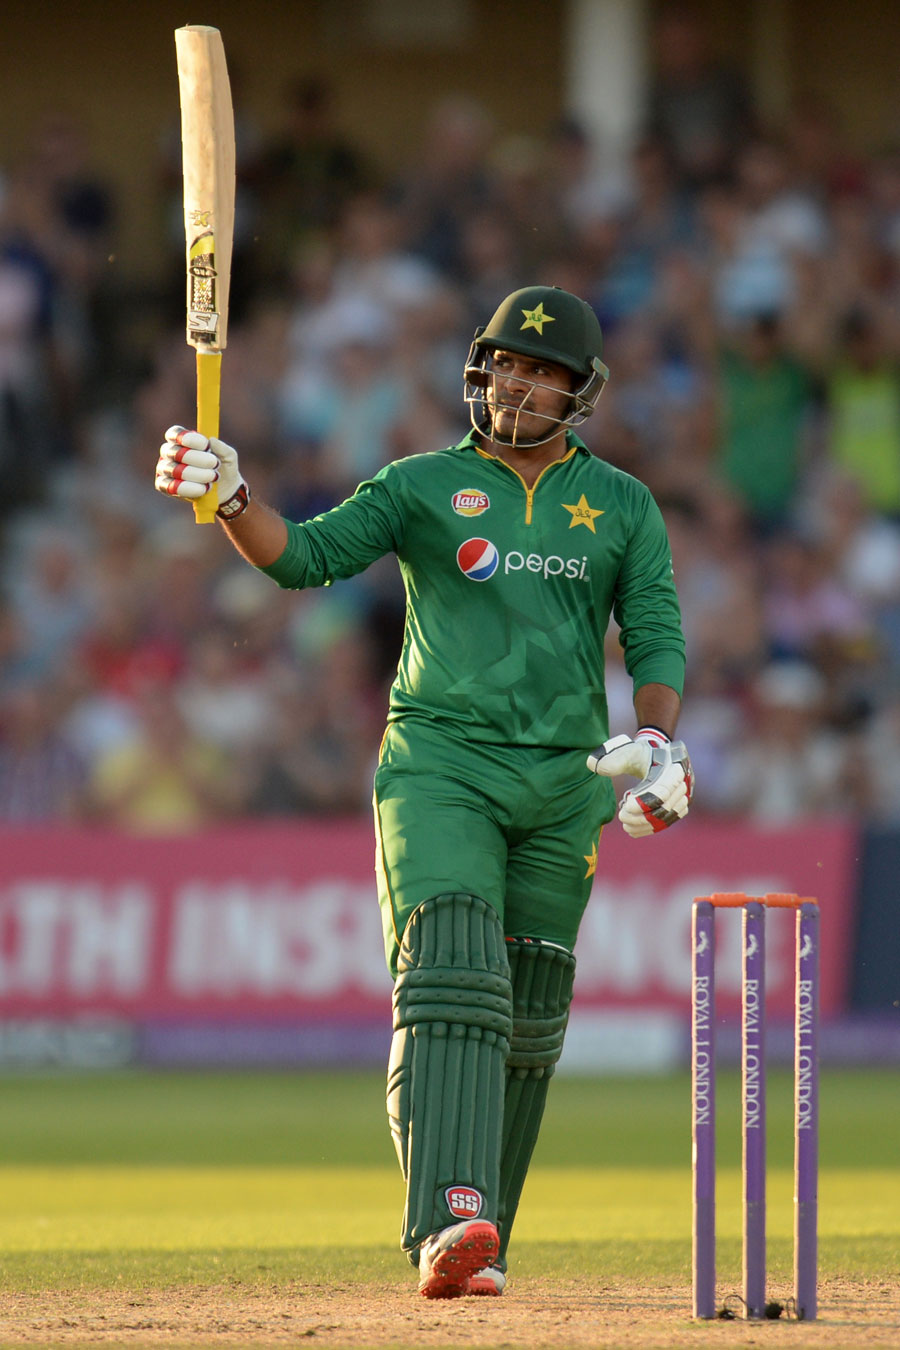 sharjeel khan hammered a 26 ball fifty against england at trent bridge on august 30 2016 photo afp